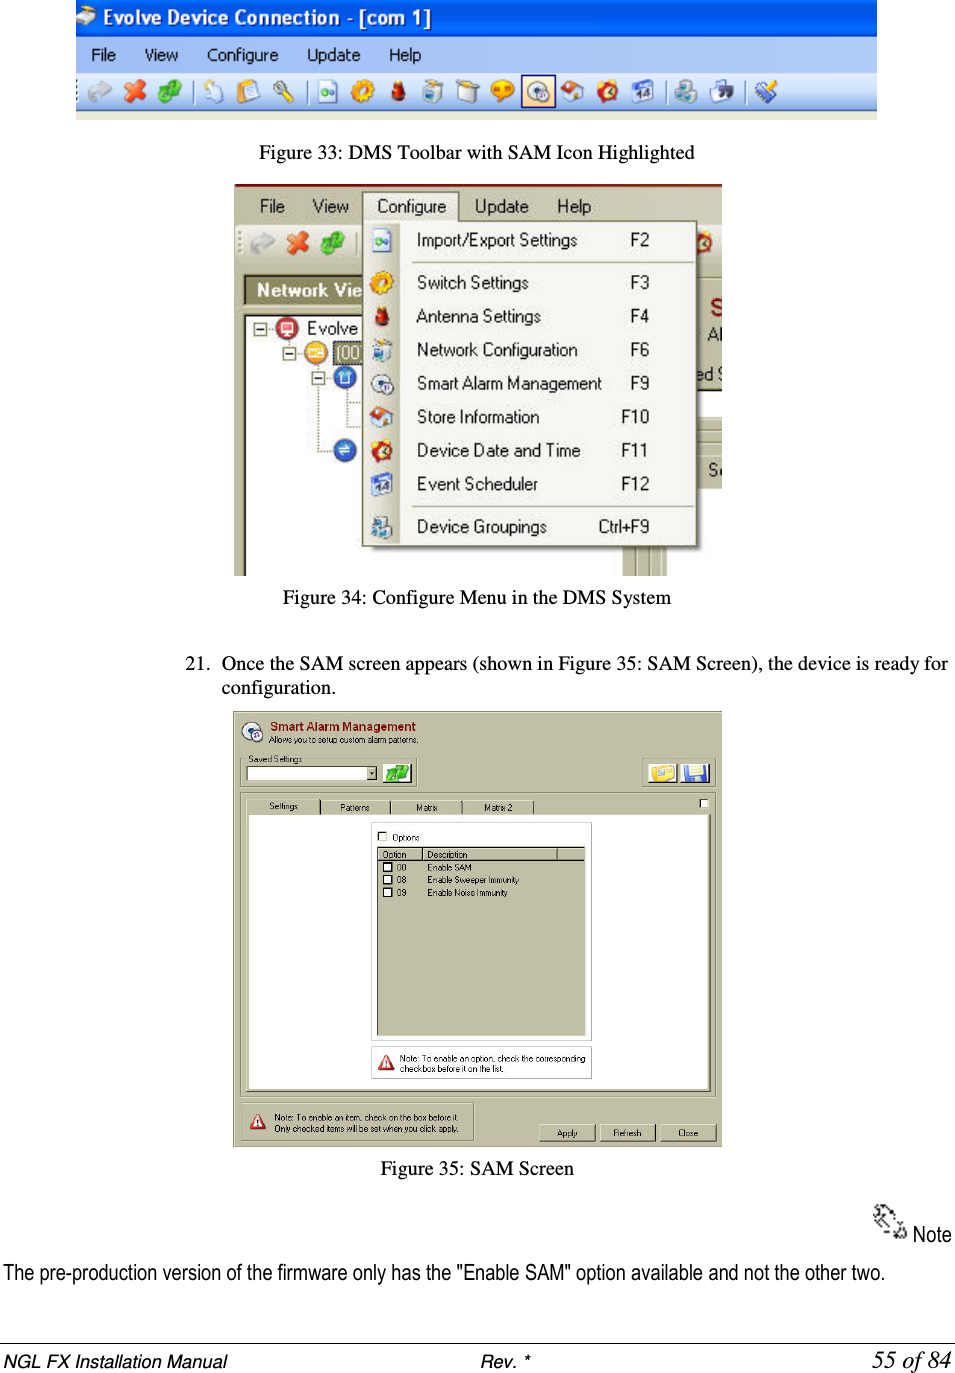 NGL FX Installation Manual                           Rev. *            55 of 84  Figure 33: DMS Toolbar with SAM Icon Highlighted  Figure 34: Configure Menu in the DMS System  21. Once the SAM screen appears (shown in Figure 35: SAM Screen), the device is ready for configuration.  Figure 35: SAM Screen Note The pre-production version of the firmware only has the &quot;Enable SAM&quot; option available and not the other two. 